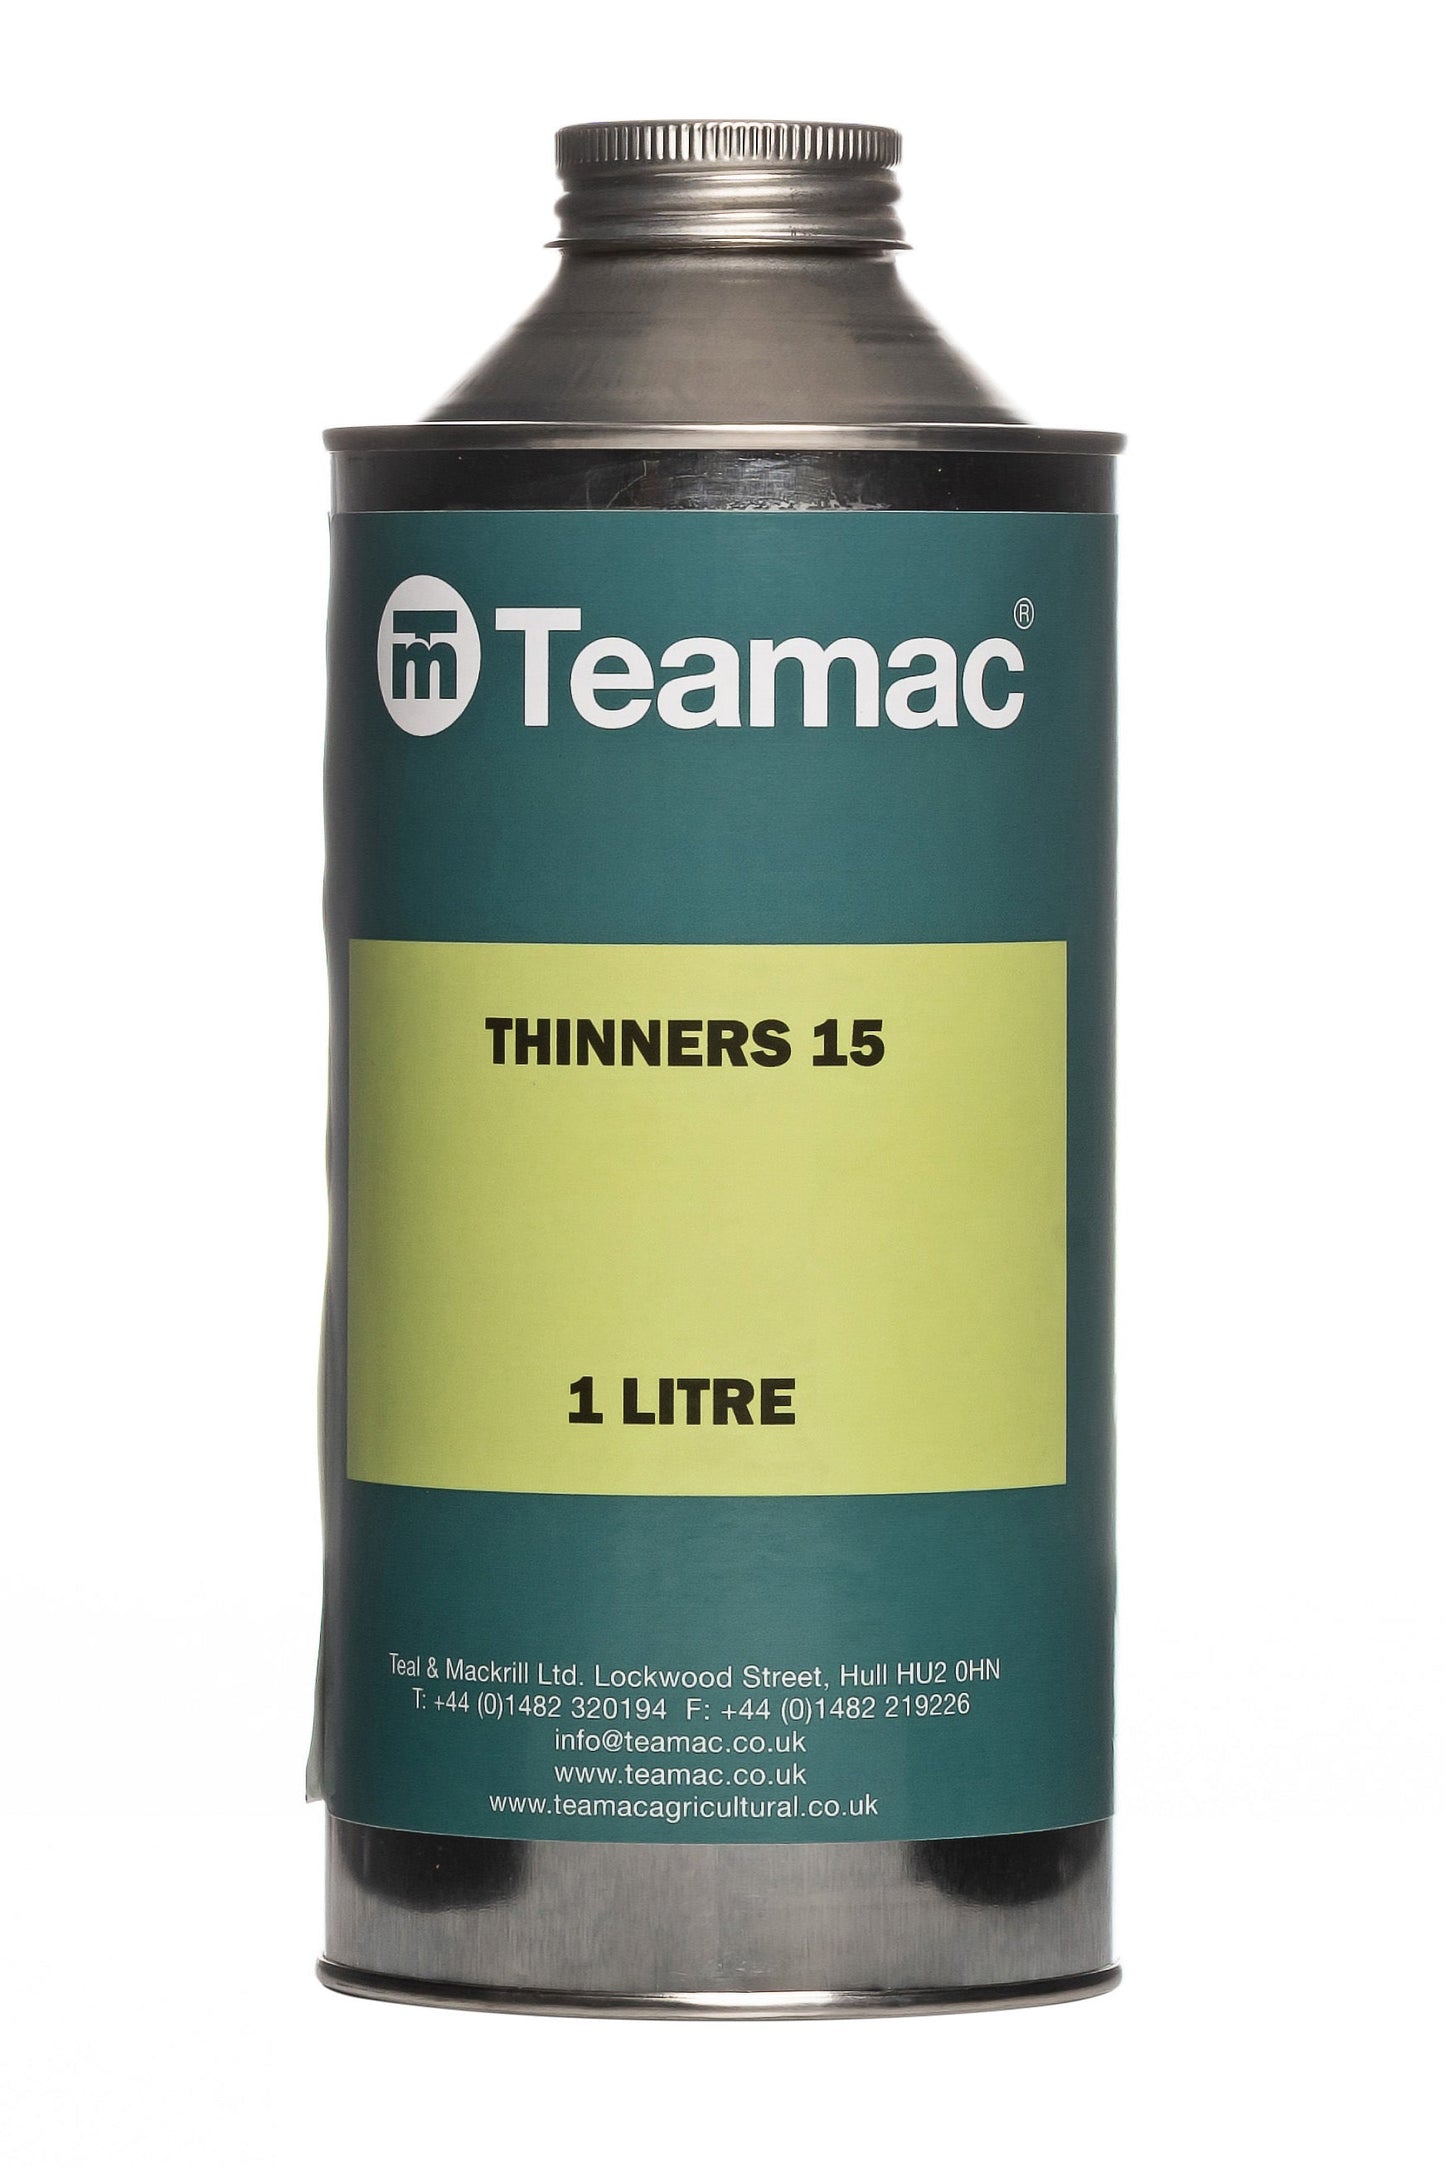 Teamac Agricultural Thinners 15 25L